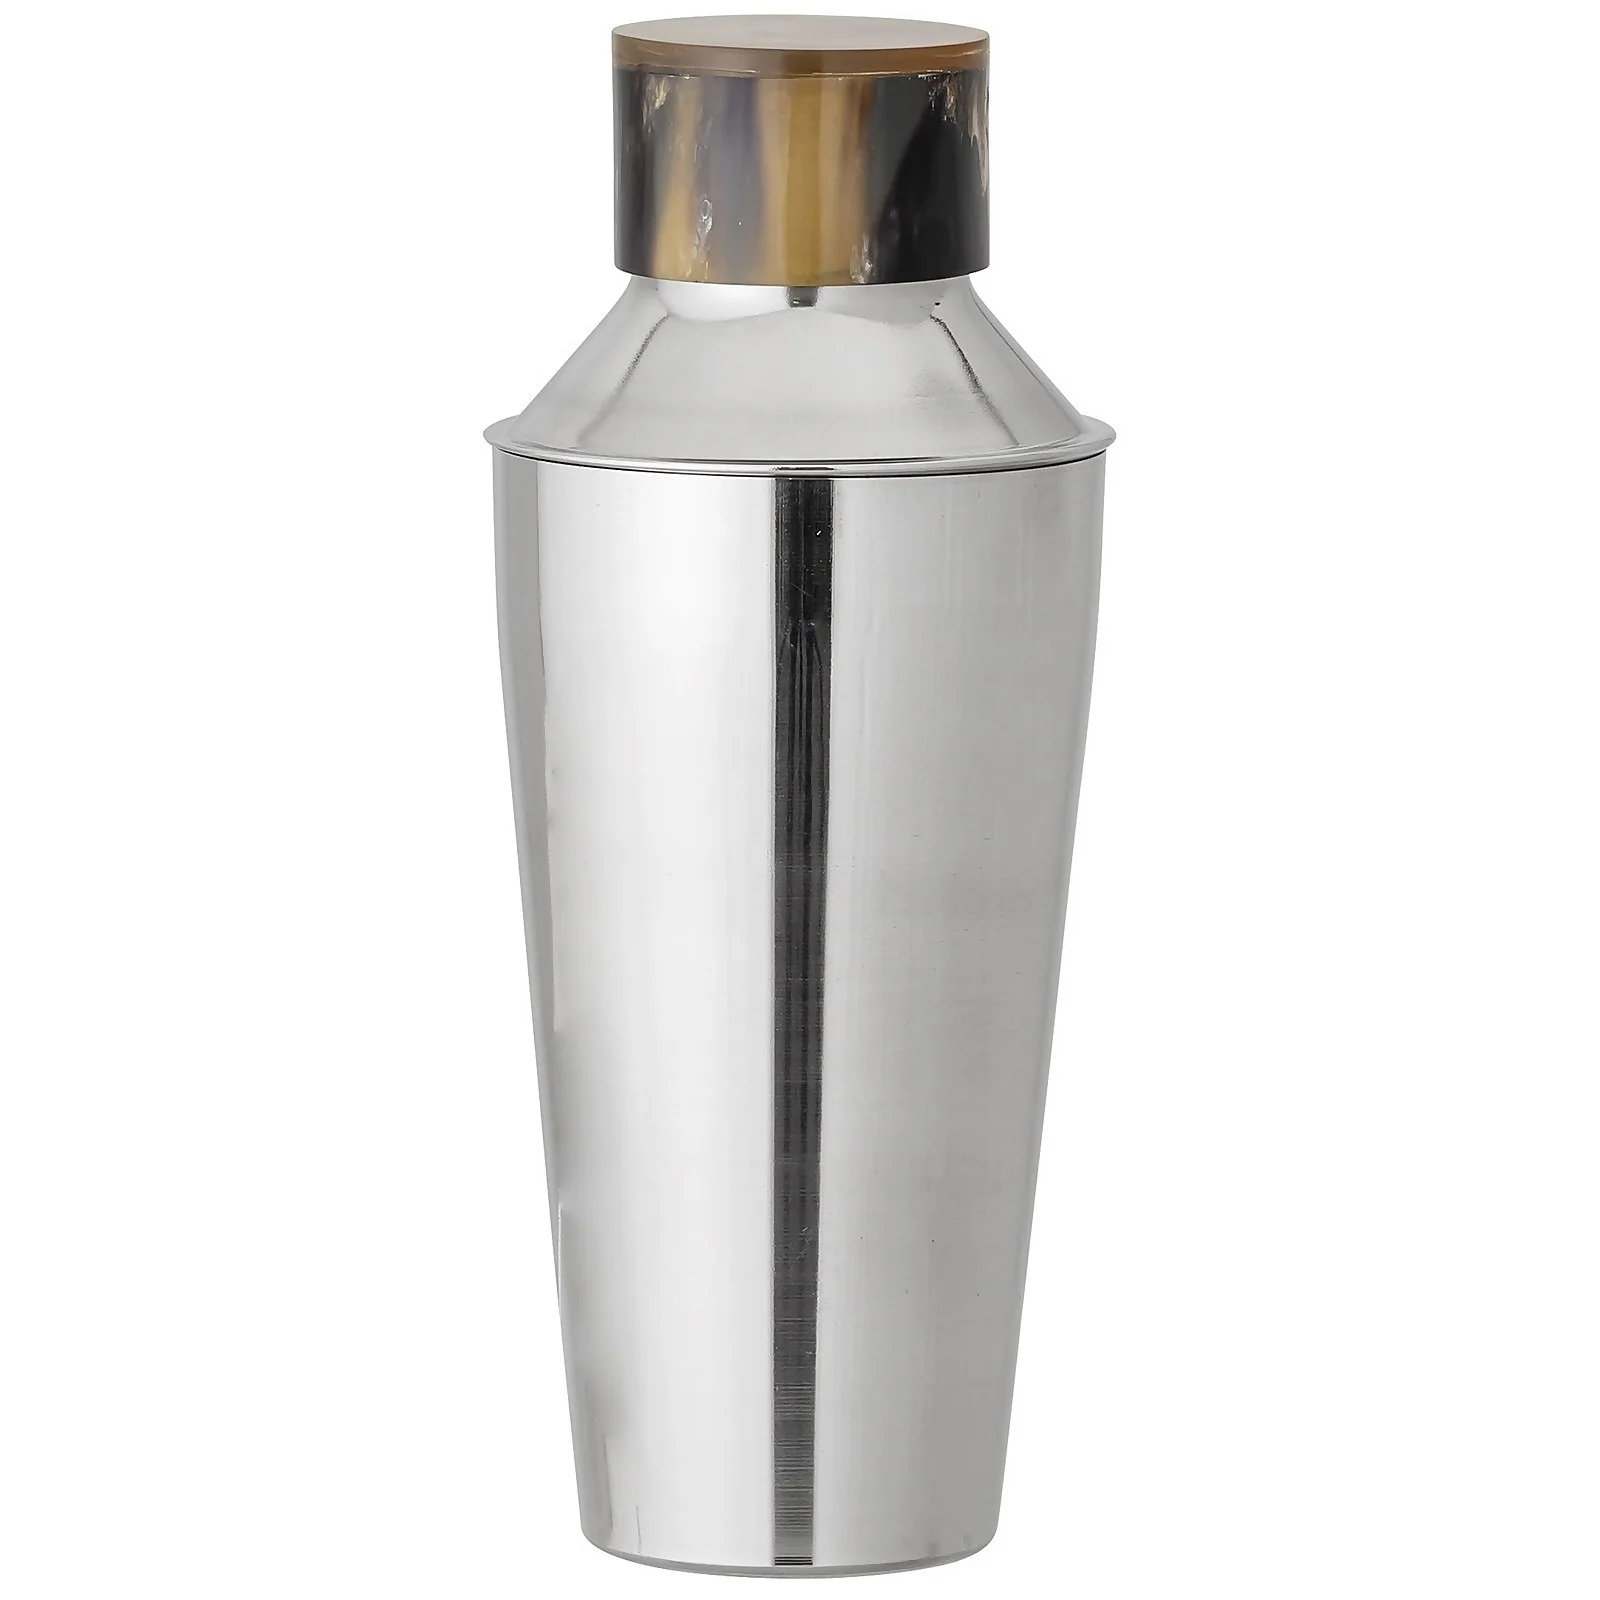 Bloomingville Cocktail Shaker - Silver Image 1